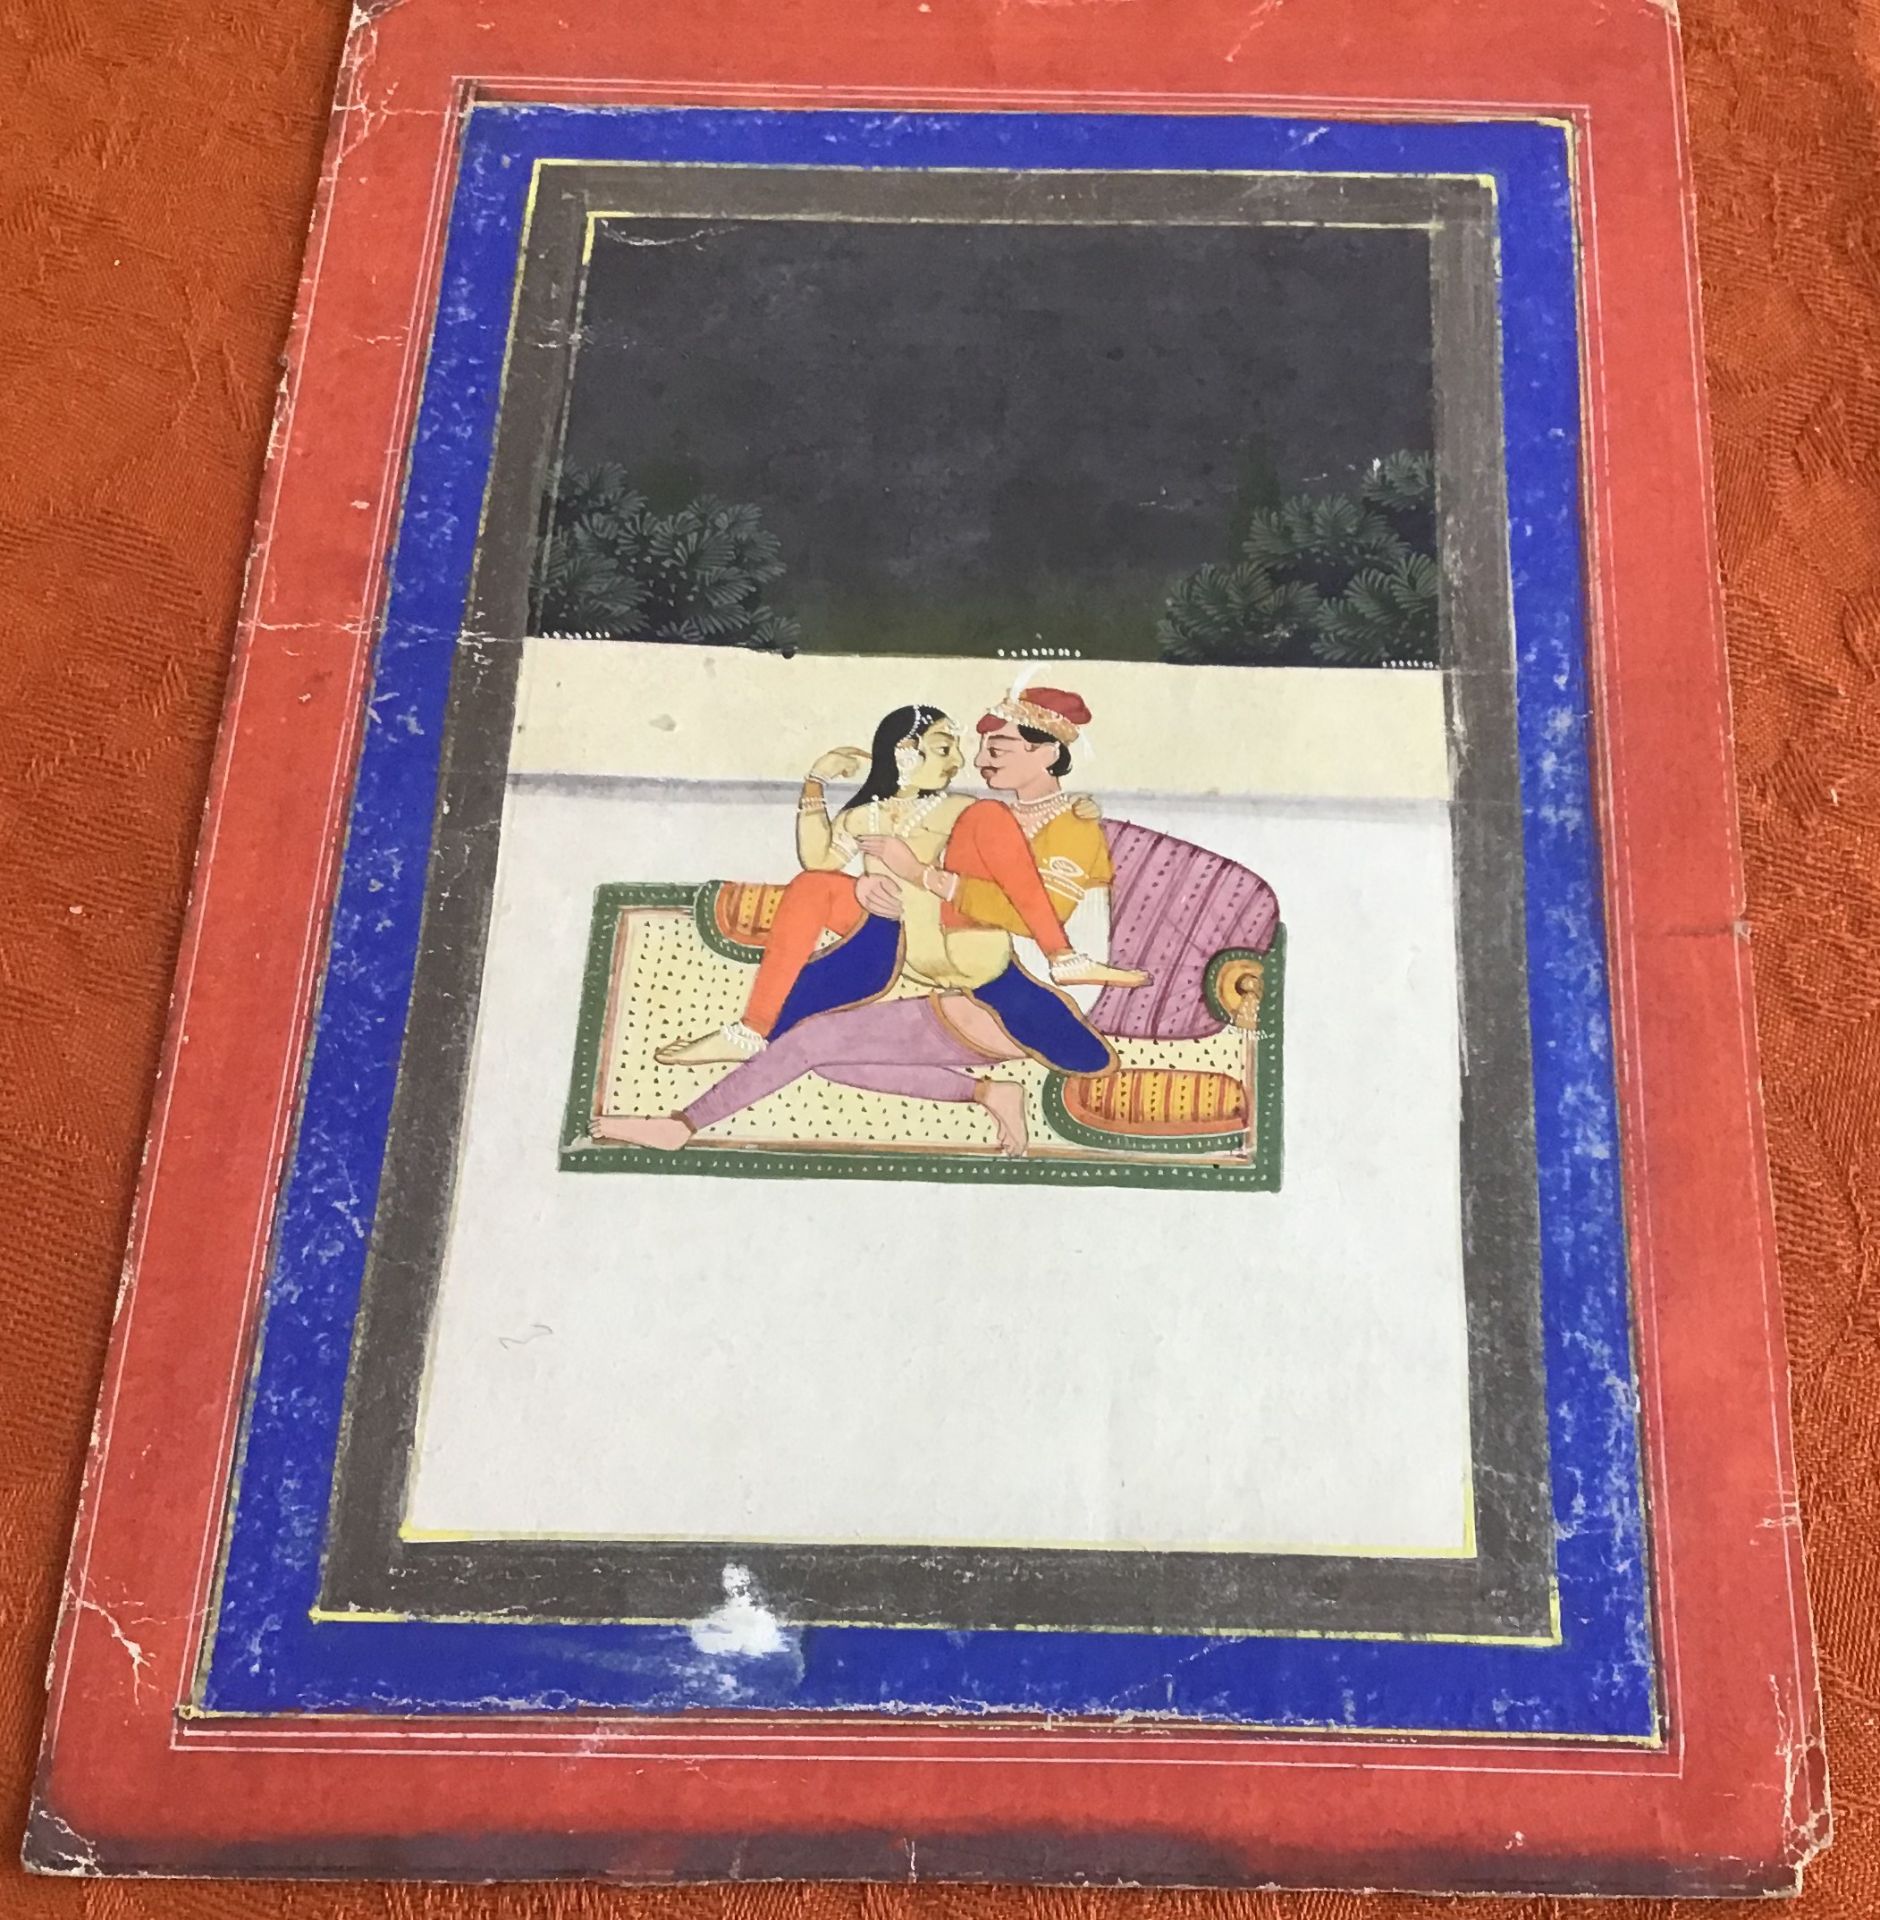 EIGHT EROTIC PAINTINGS. East India. Rajasthan, prob. Jaipur. Late 19th/beg. 20th c. Pigments and - Bild 9 aus 11